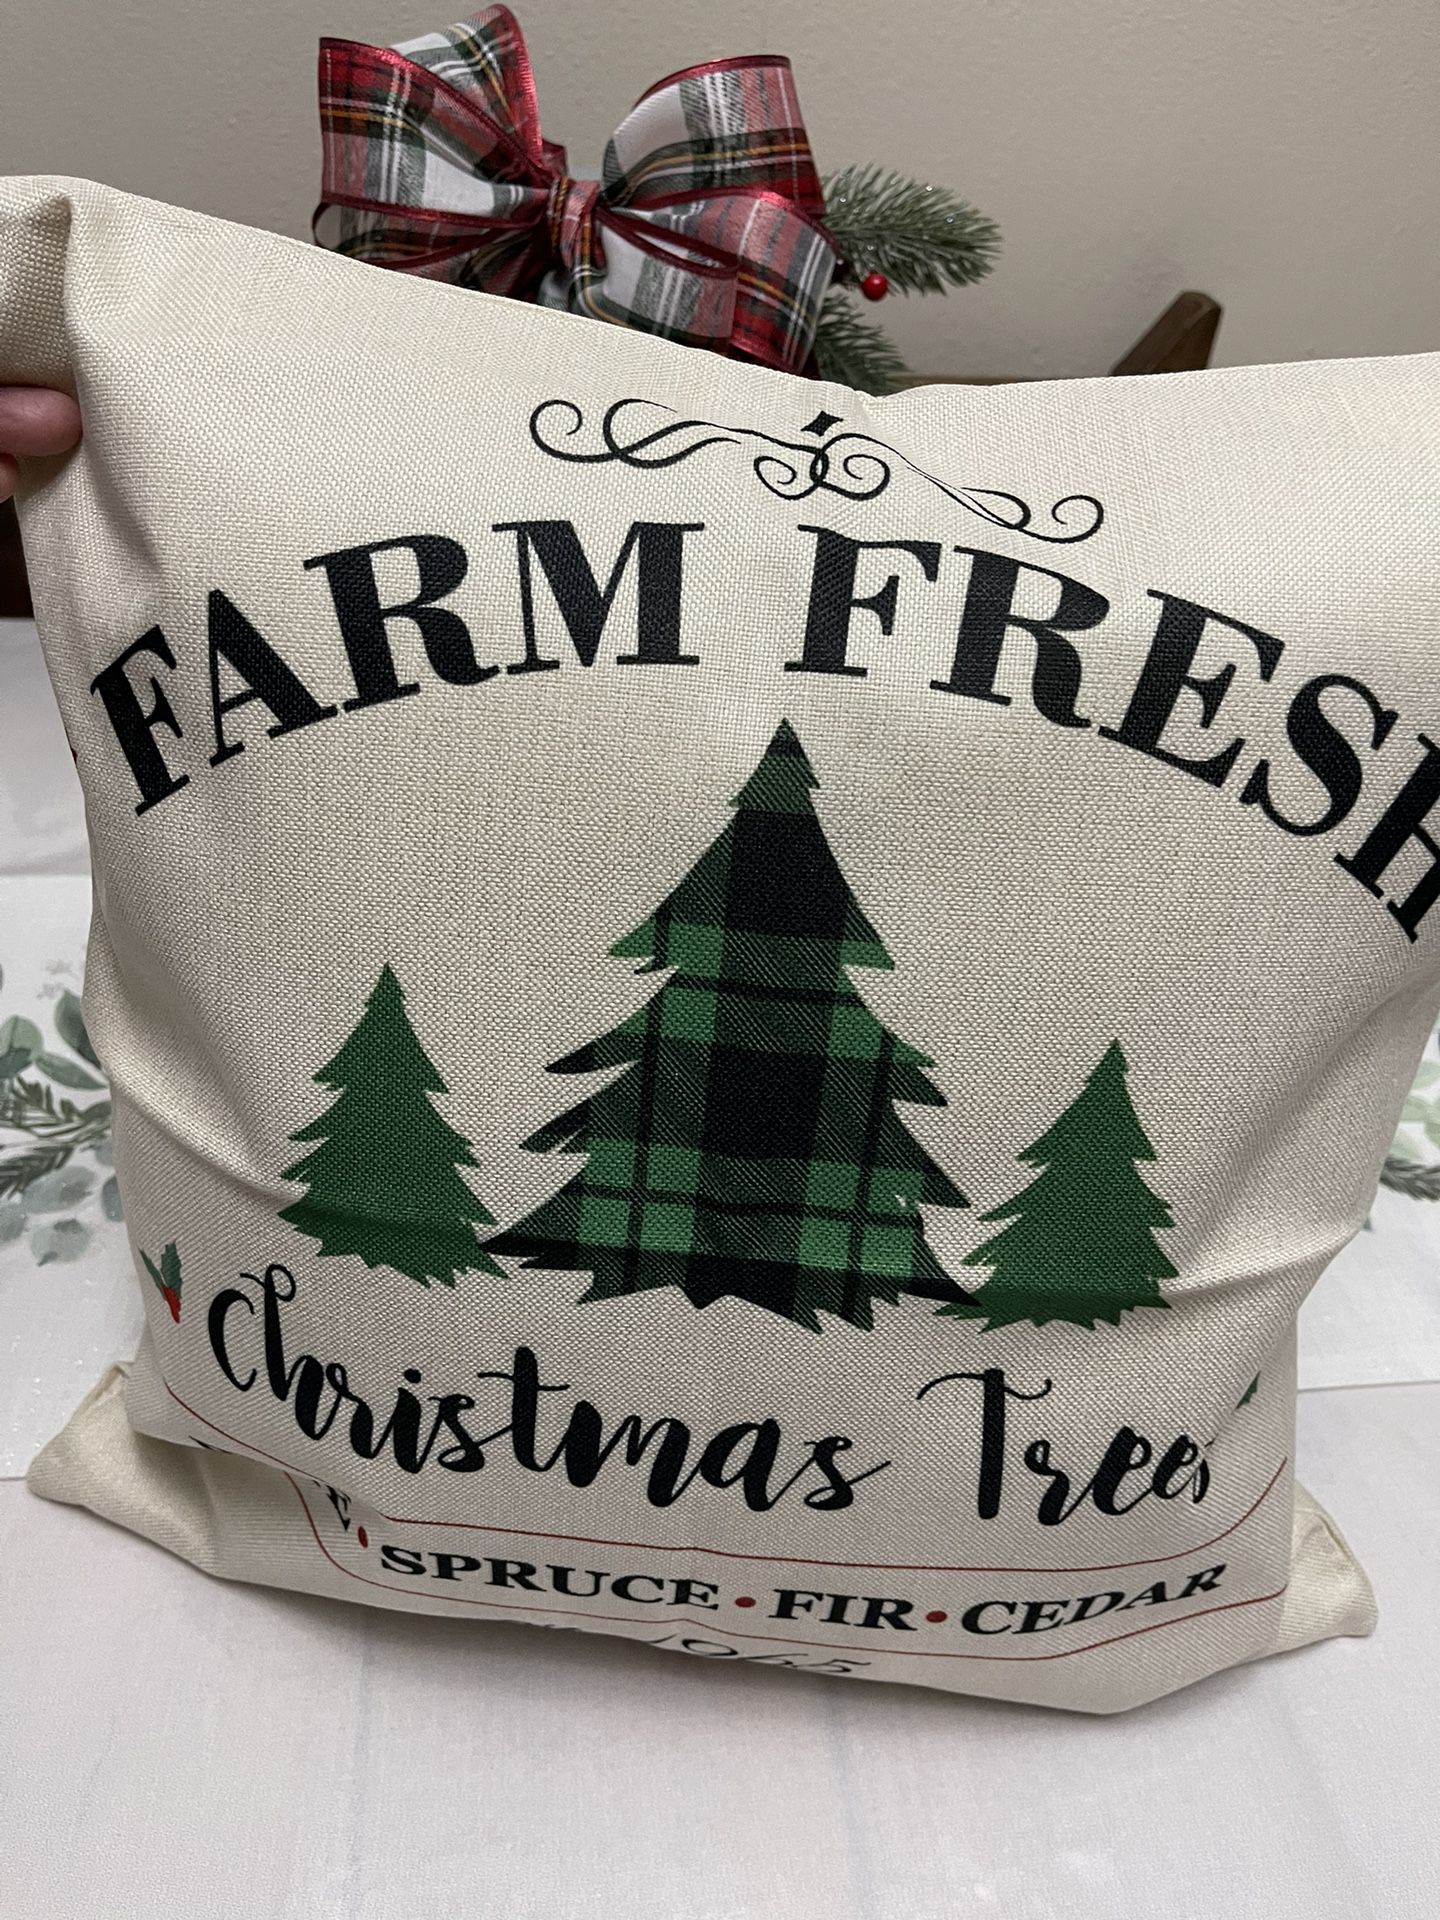 Christmas Pillow Case Covers